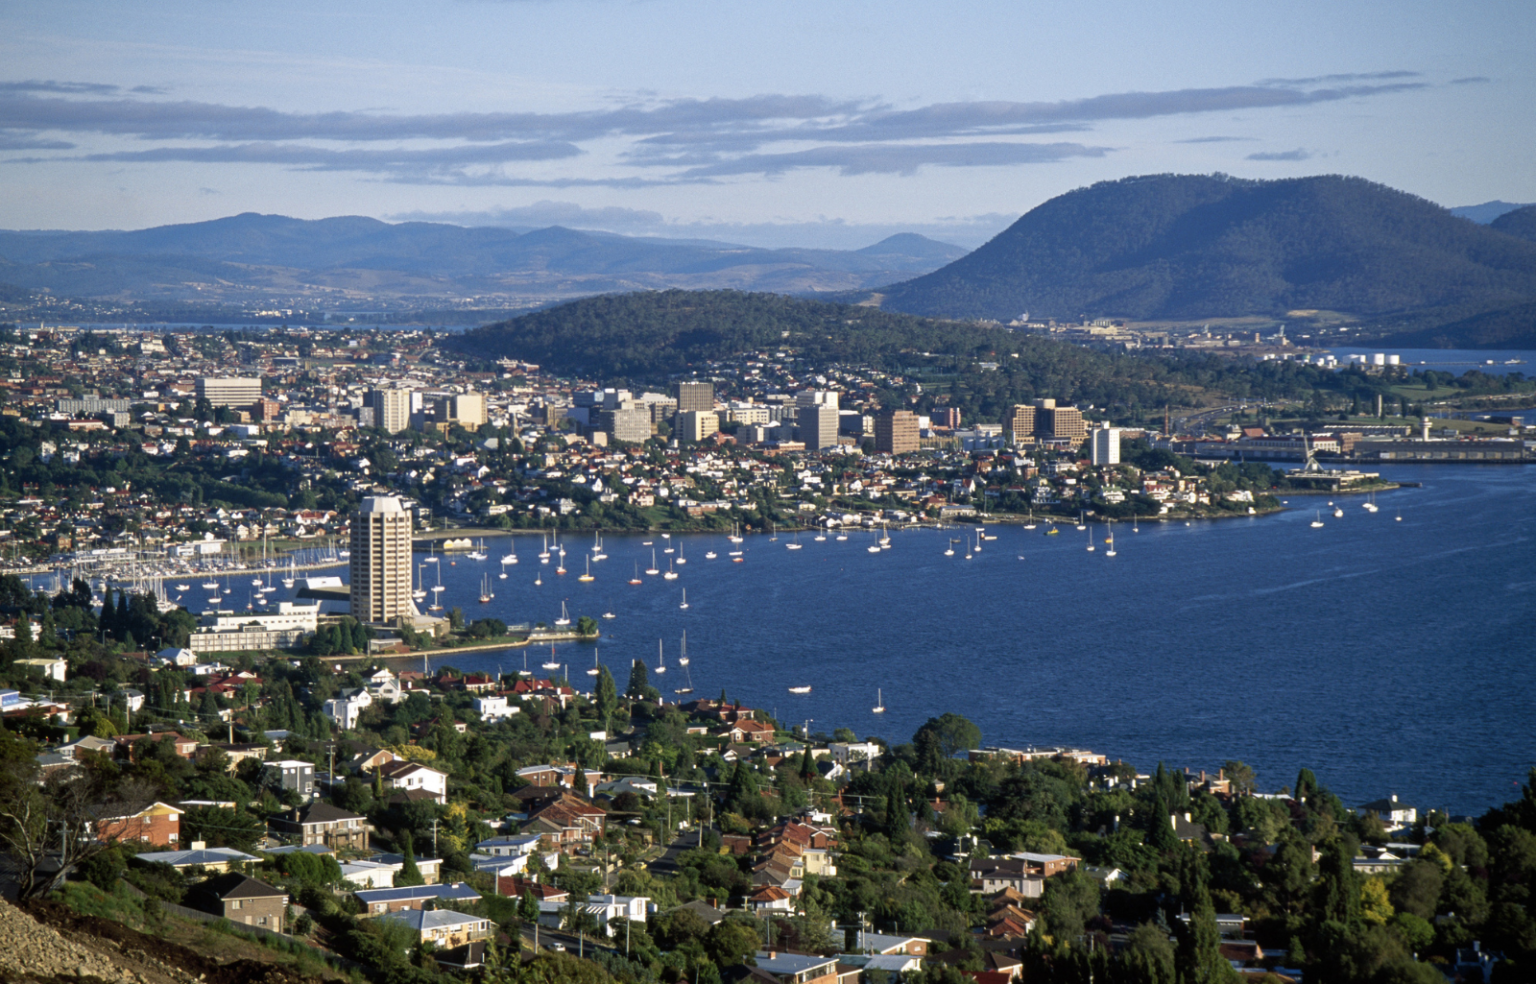 Discover Hobart’s Historic Past